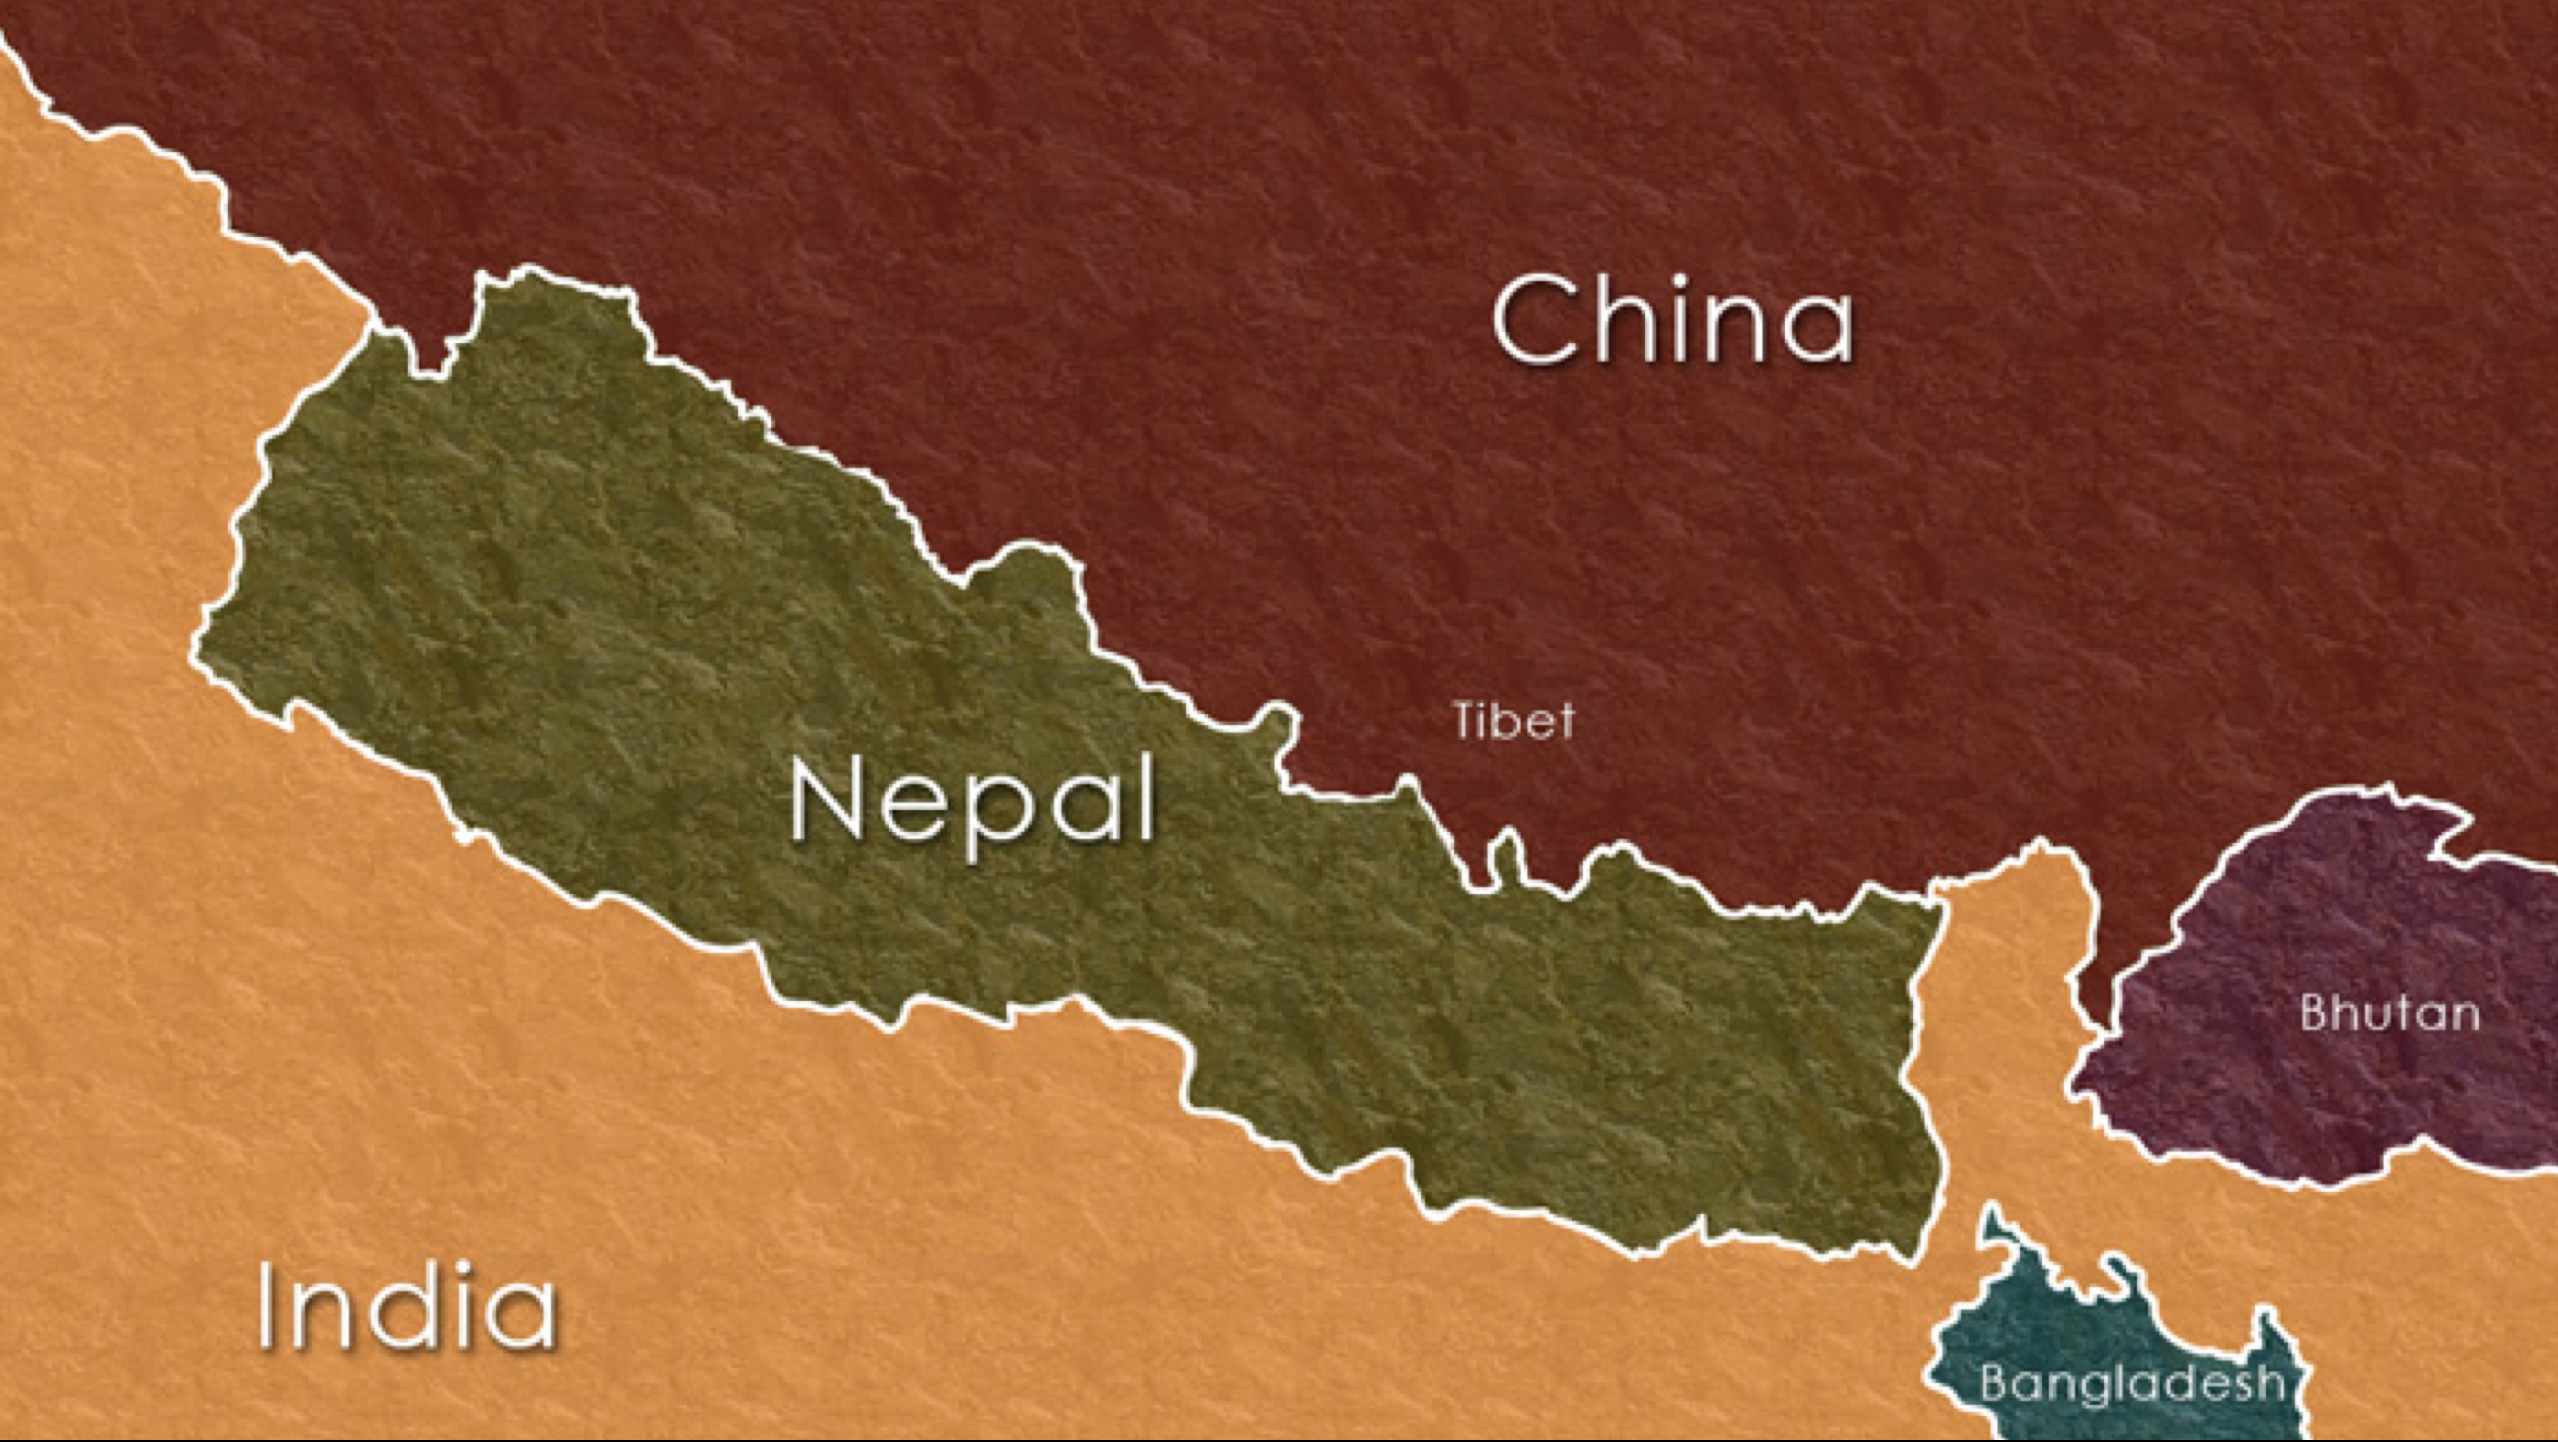 Nepal is stuck between China and India